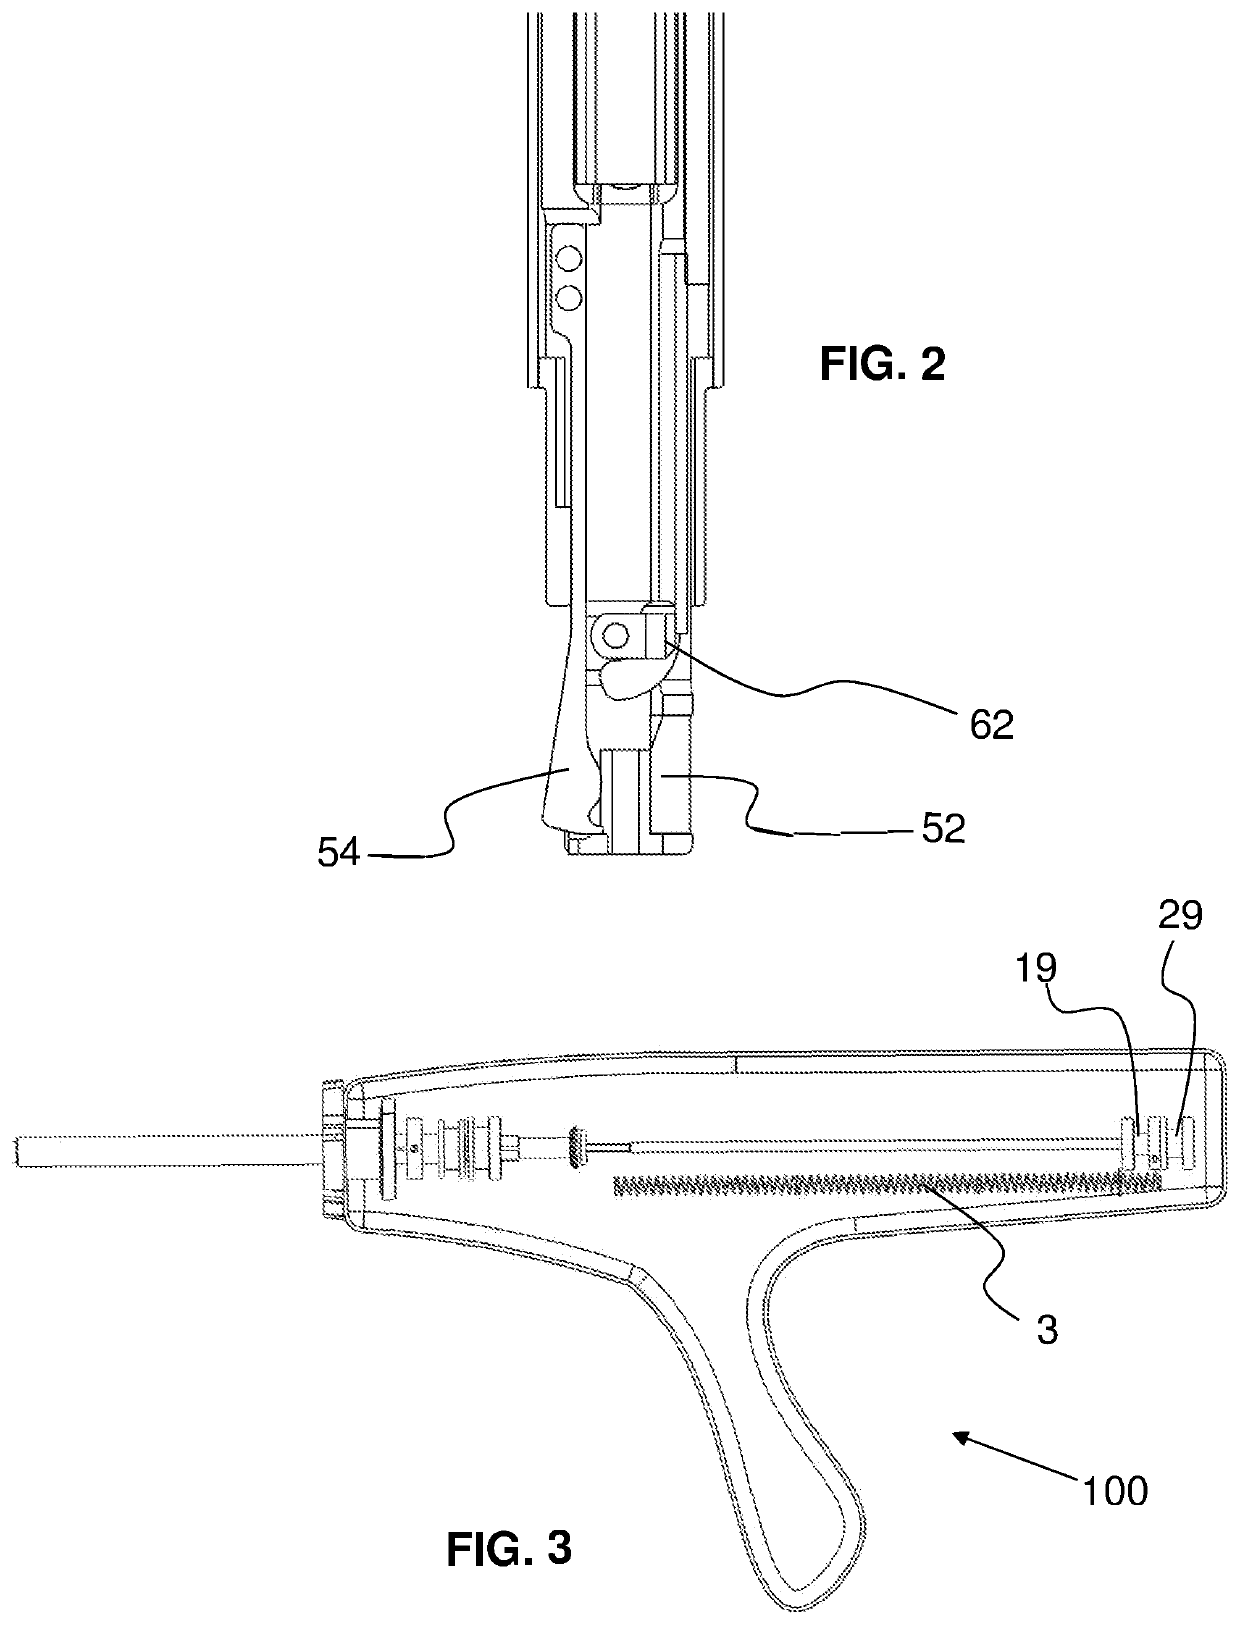 Multiple-firing suture fixation device and methods for using and manufacturing same